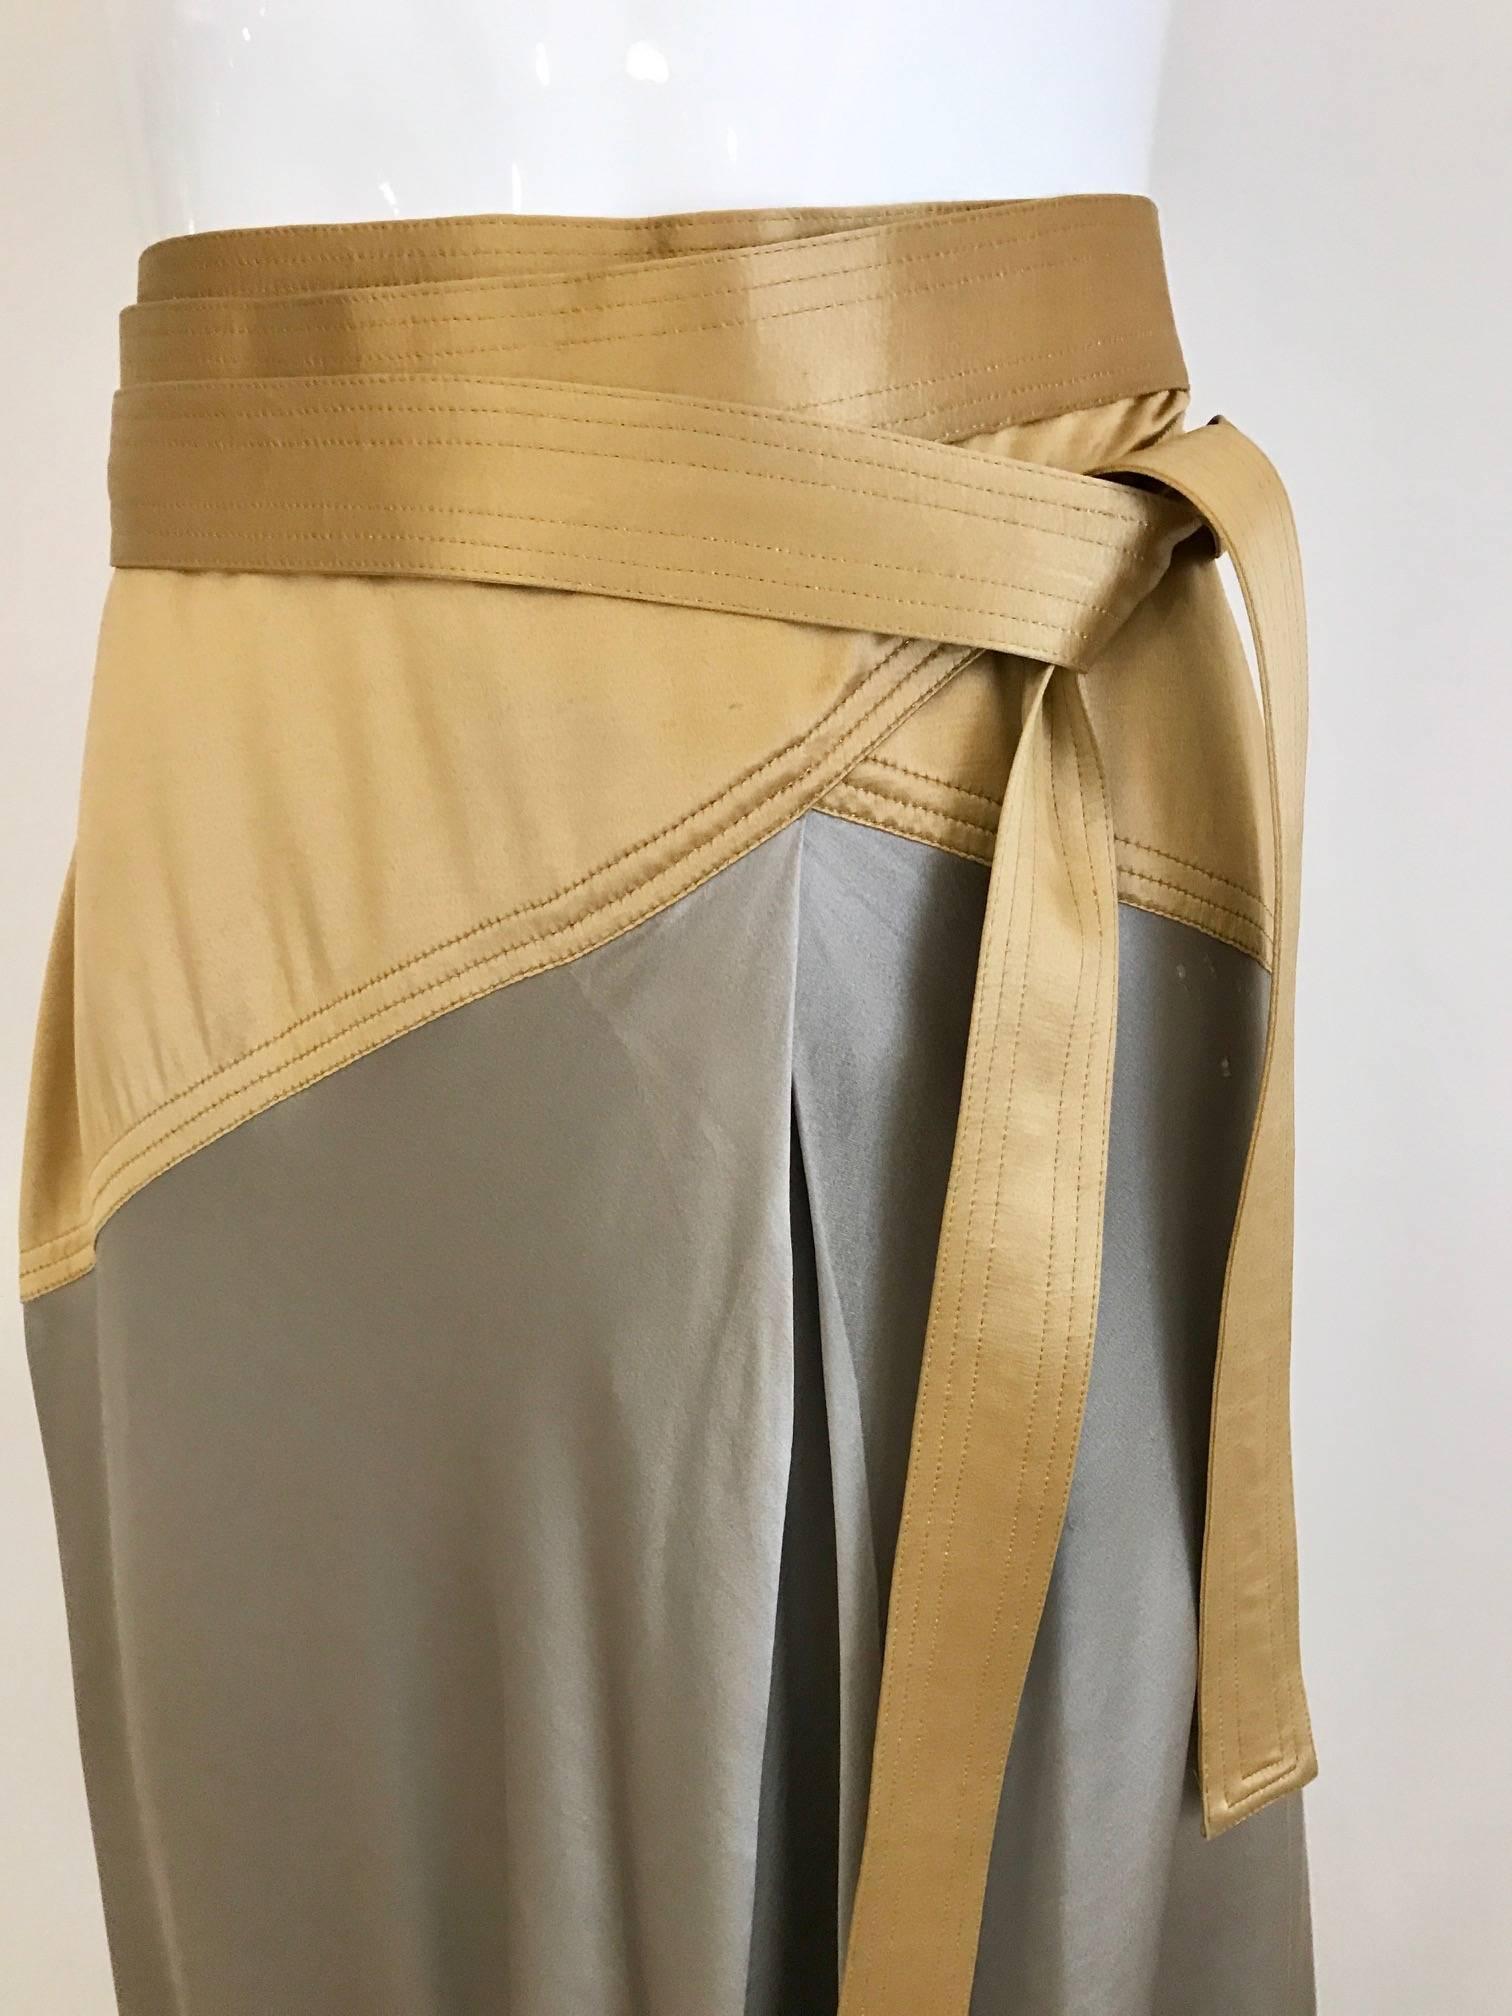 This vintage 90s Geoffrey Beene gold and gray silk charmeuse wrap skirt is very slinky but elegant! The gold sits on the hips and extends around the body in the long wrap belt, with the shiny silver silk adorning the bottom of the garment. We styled